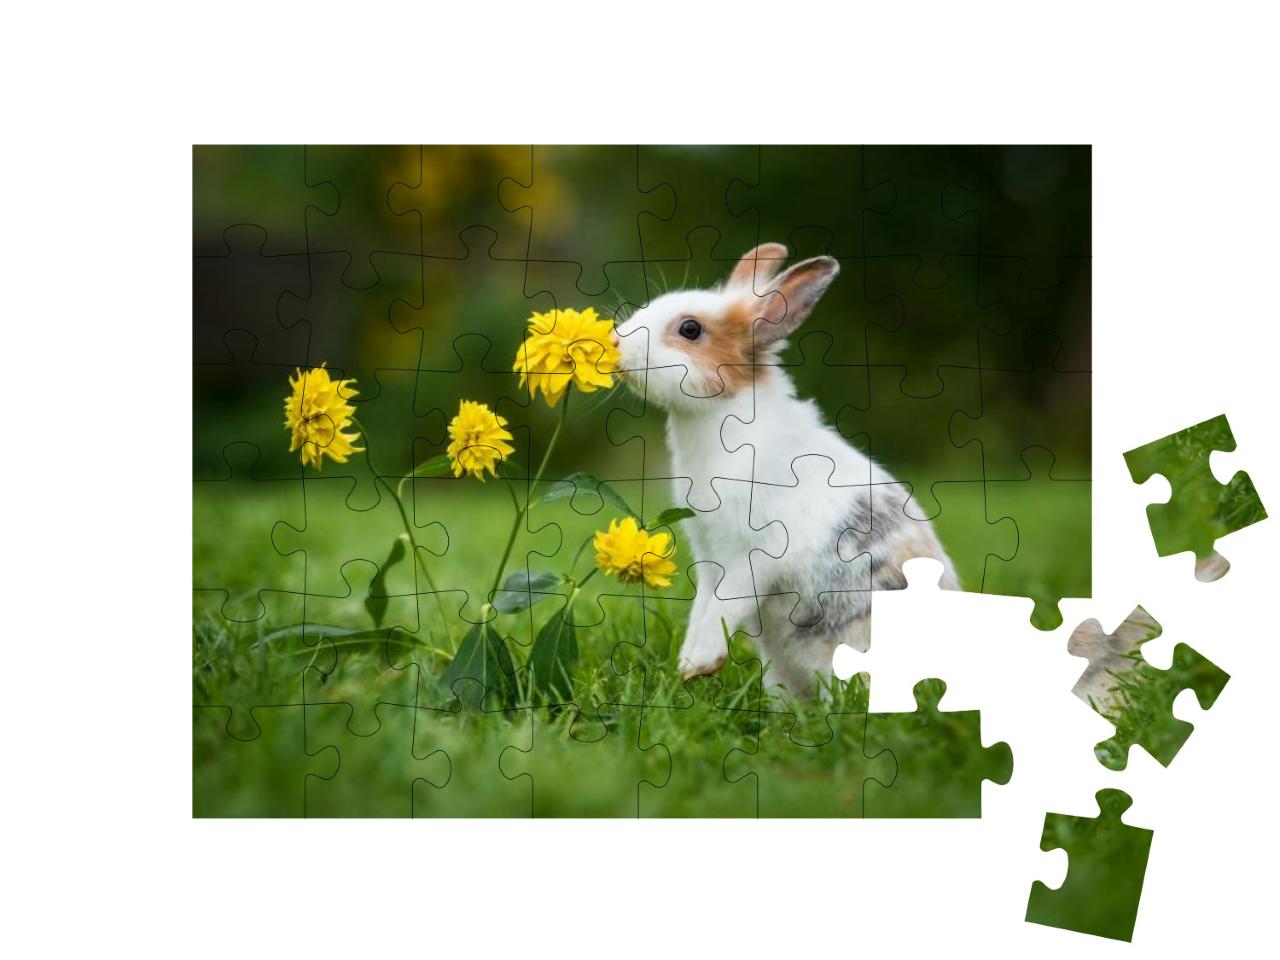 Little Rabbit Smelling a Flower in the Garden... Jigsaw Puzzle with 48 pieces